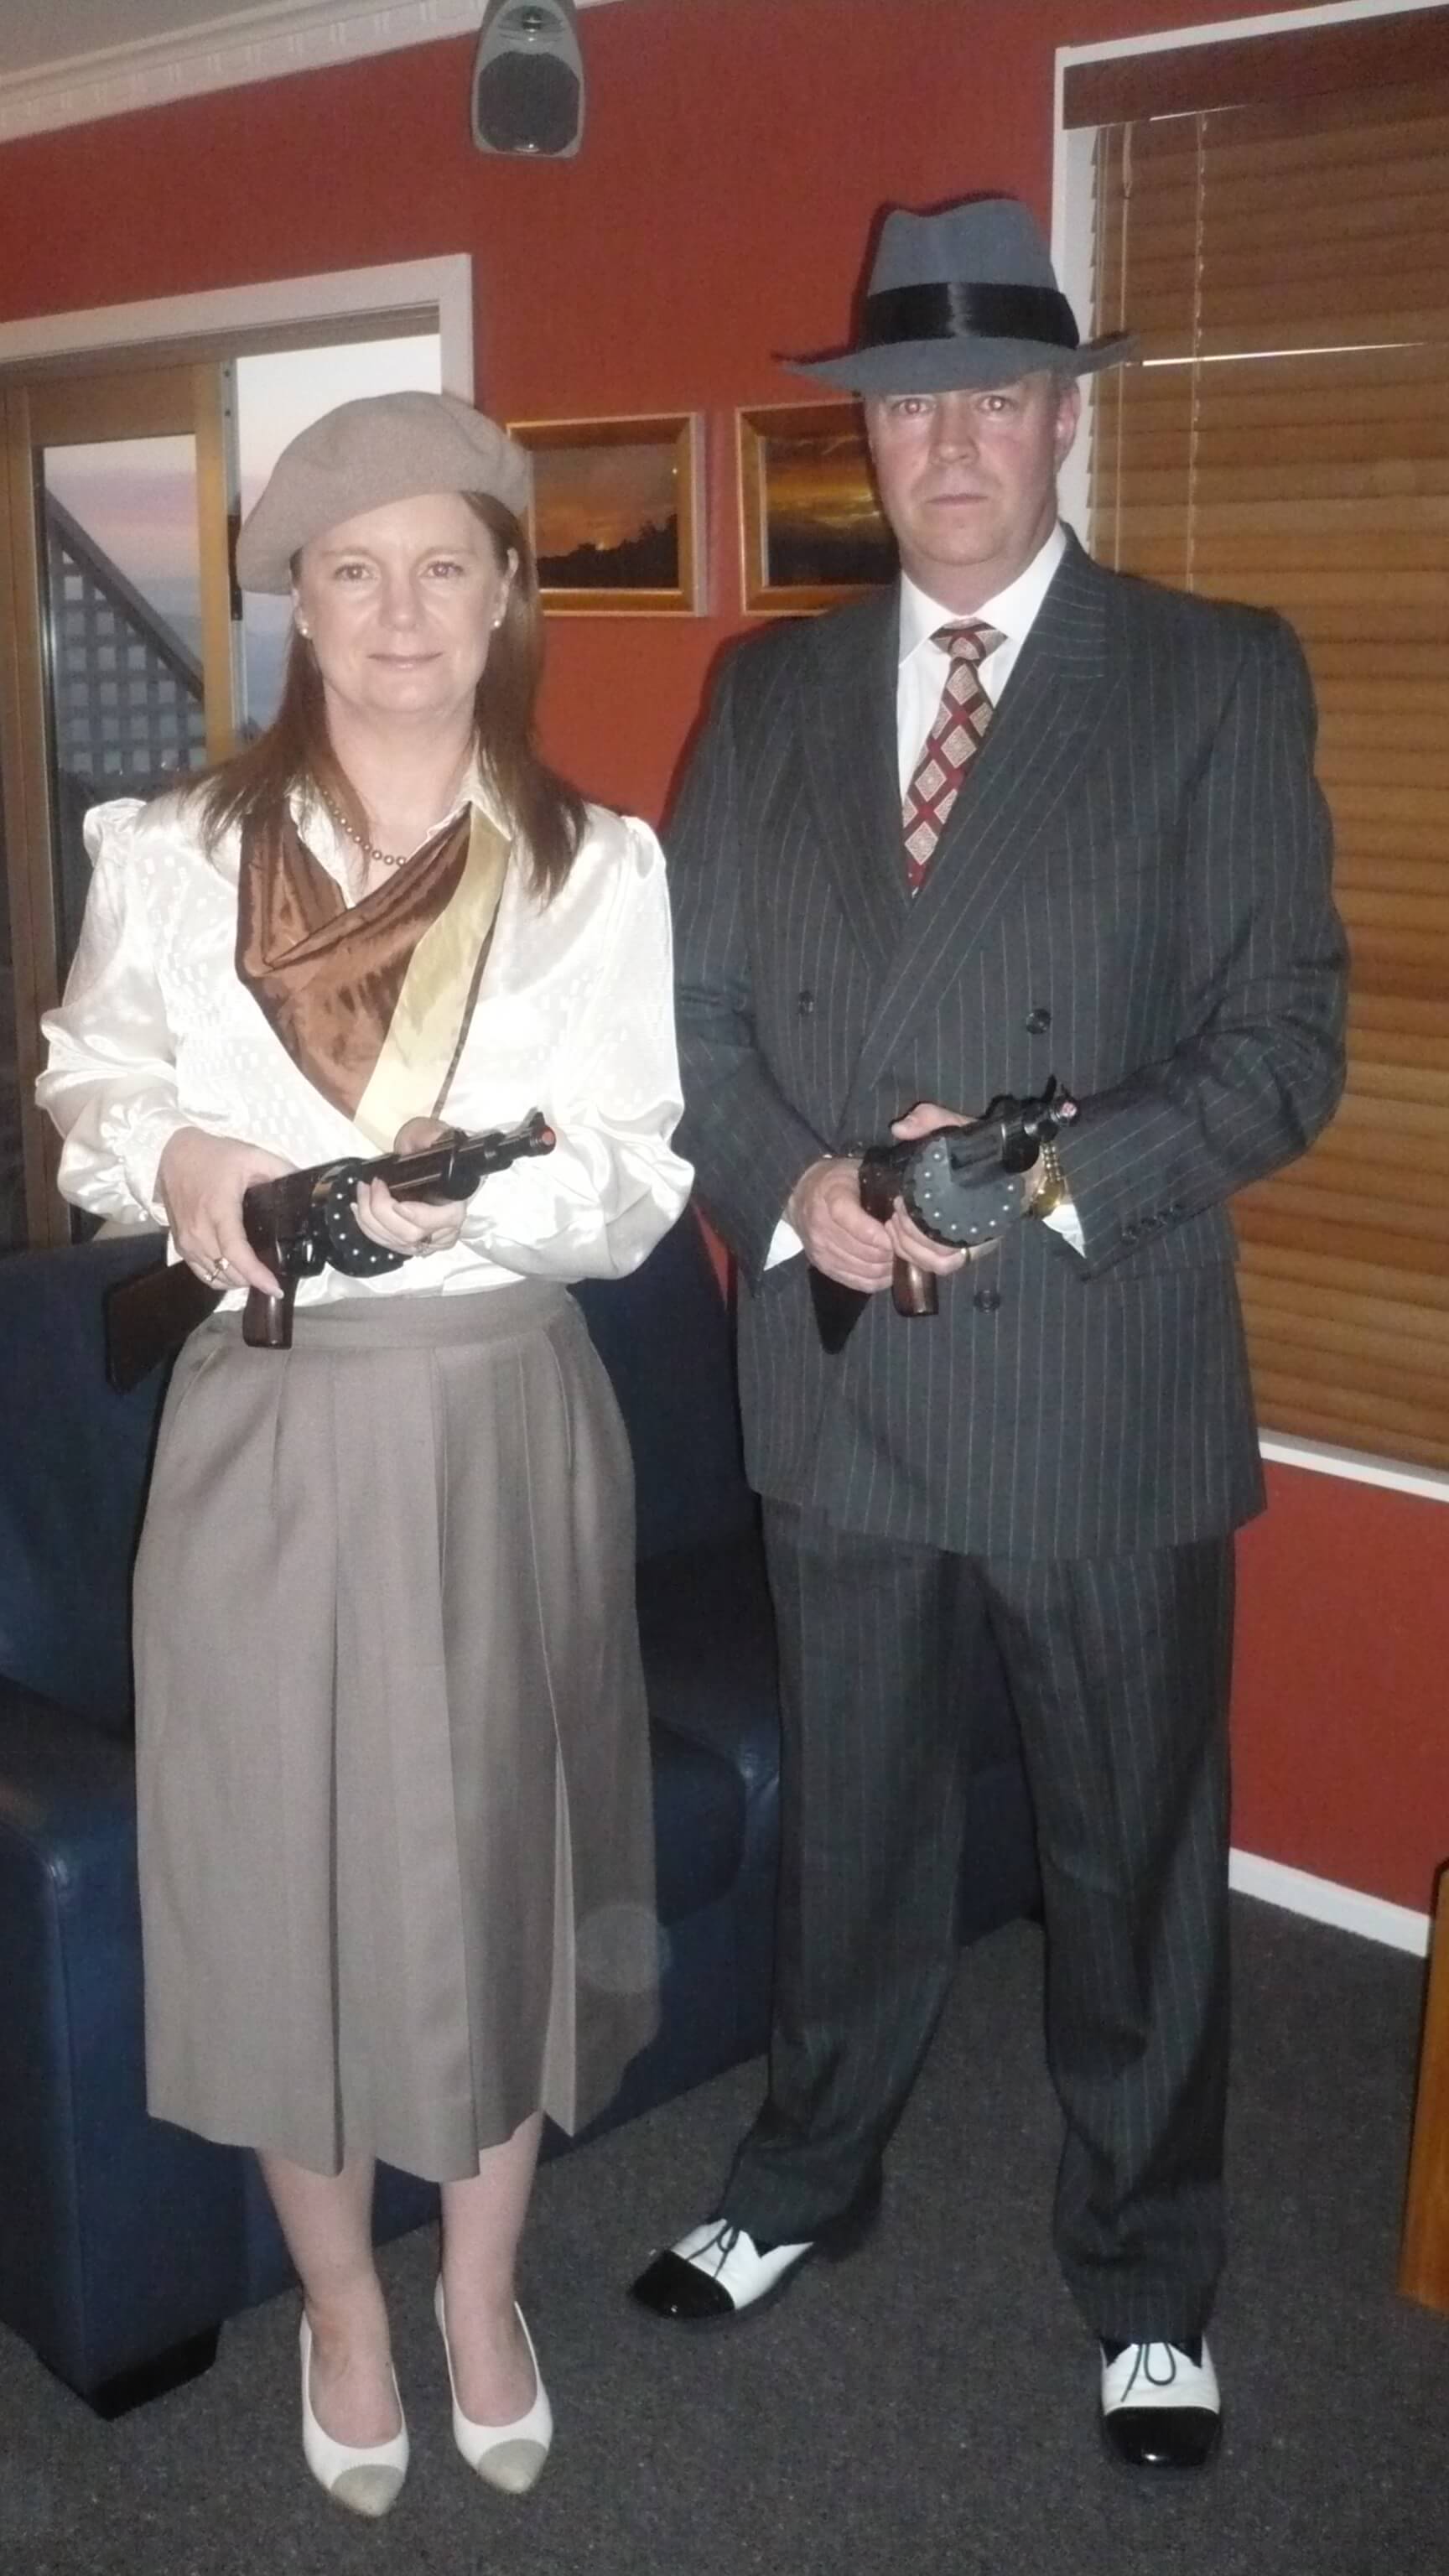 bonnie and clyde costumes for kids